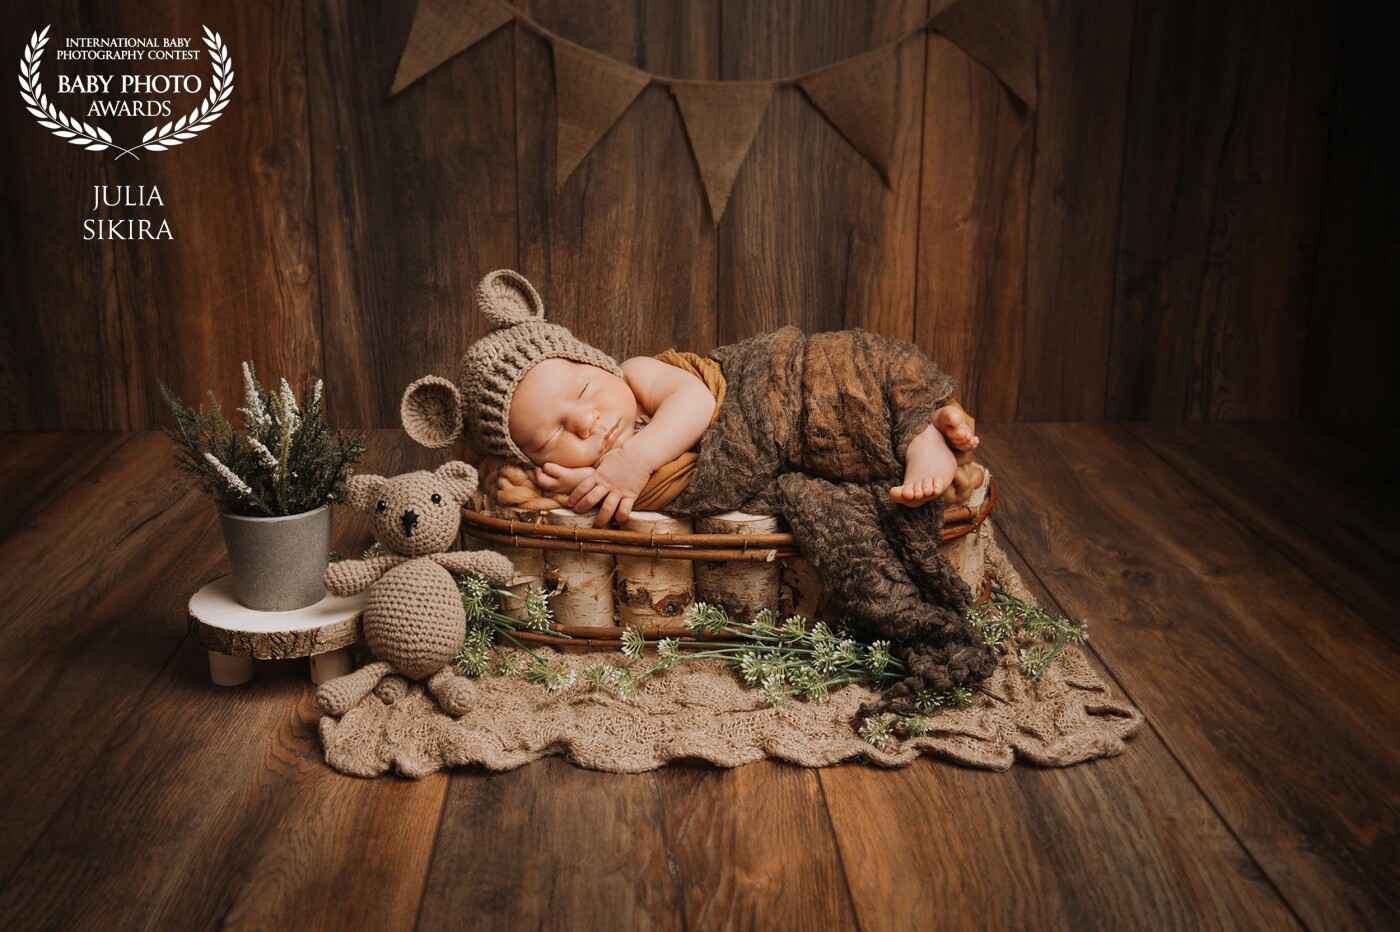 This photo shows a little boy dressed as a bear. The little boy didn't want to take part in the photoshoot and just cried. When I swaddled the baby, he immediately calmed down. Then he also fell asleep. For the photoshoot, we have used natural colors like brown and green. 